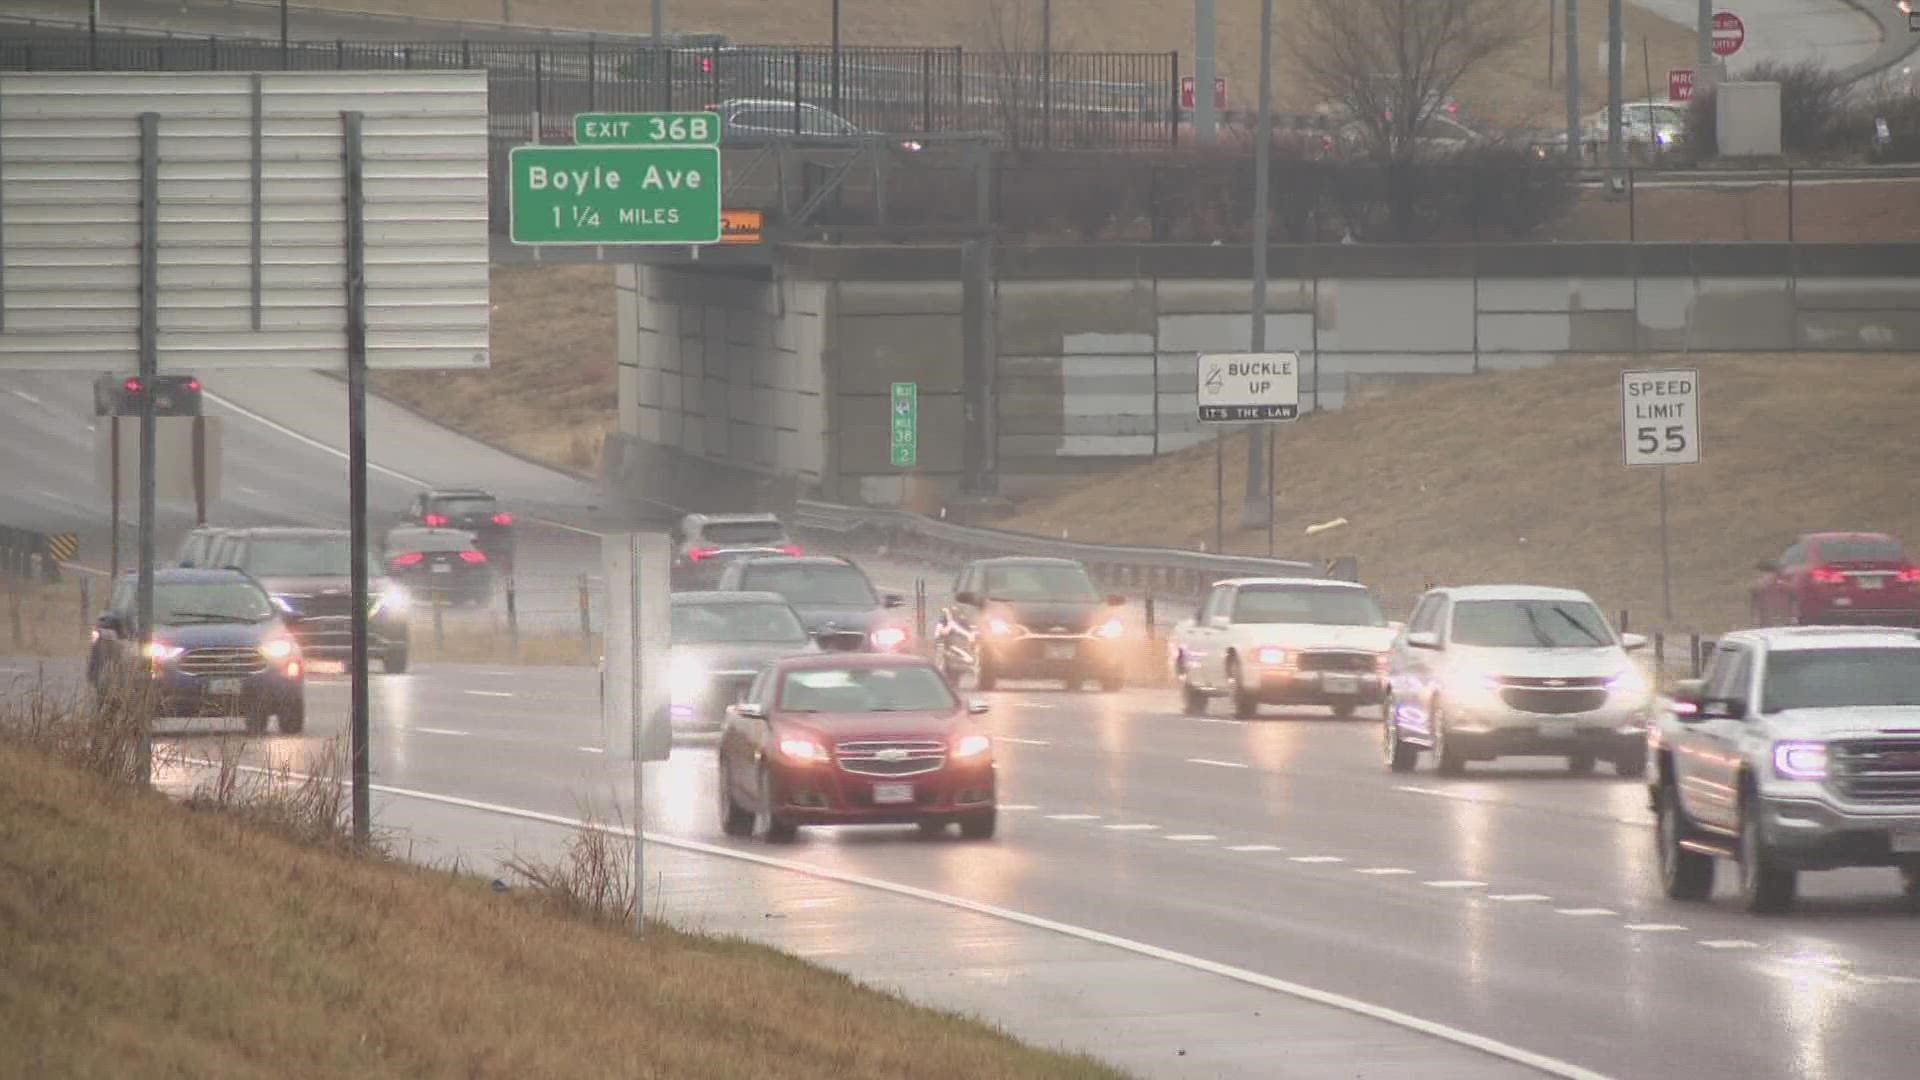 Wednesday night MoDOT held an open house to discuss plans.